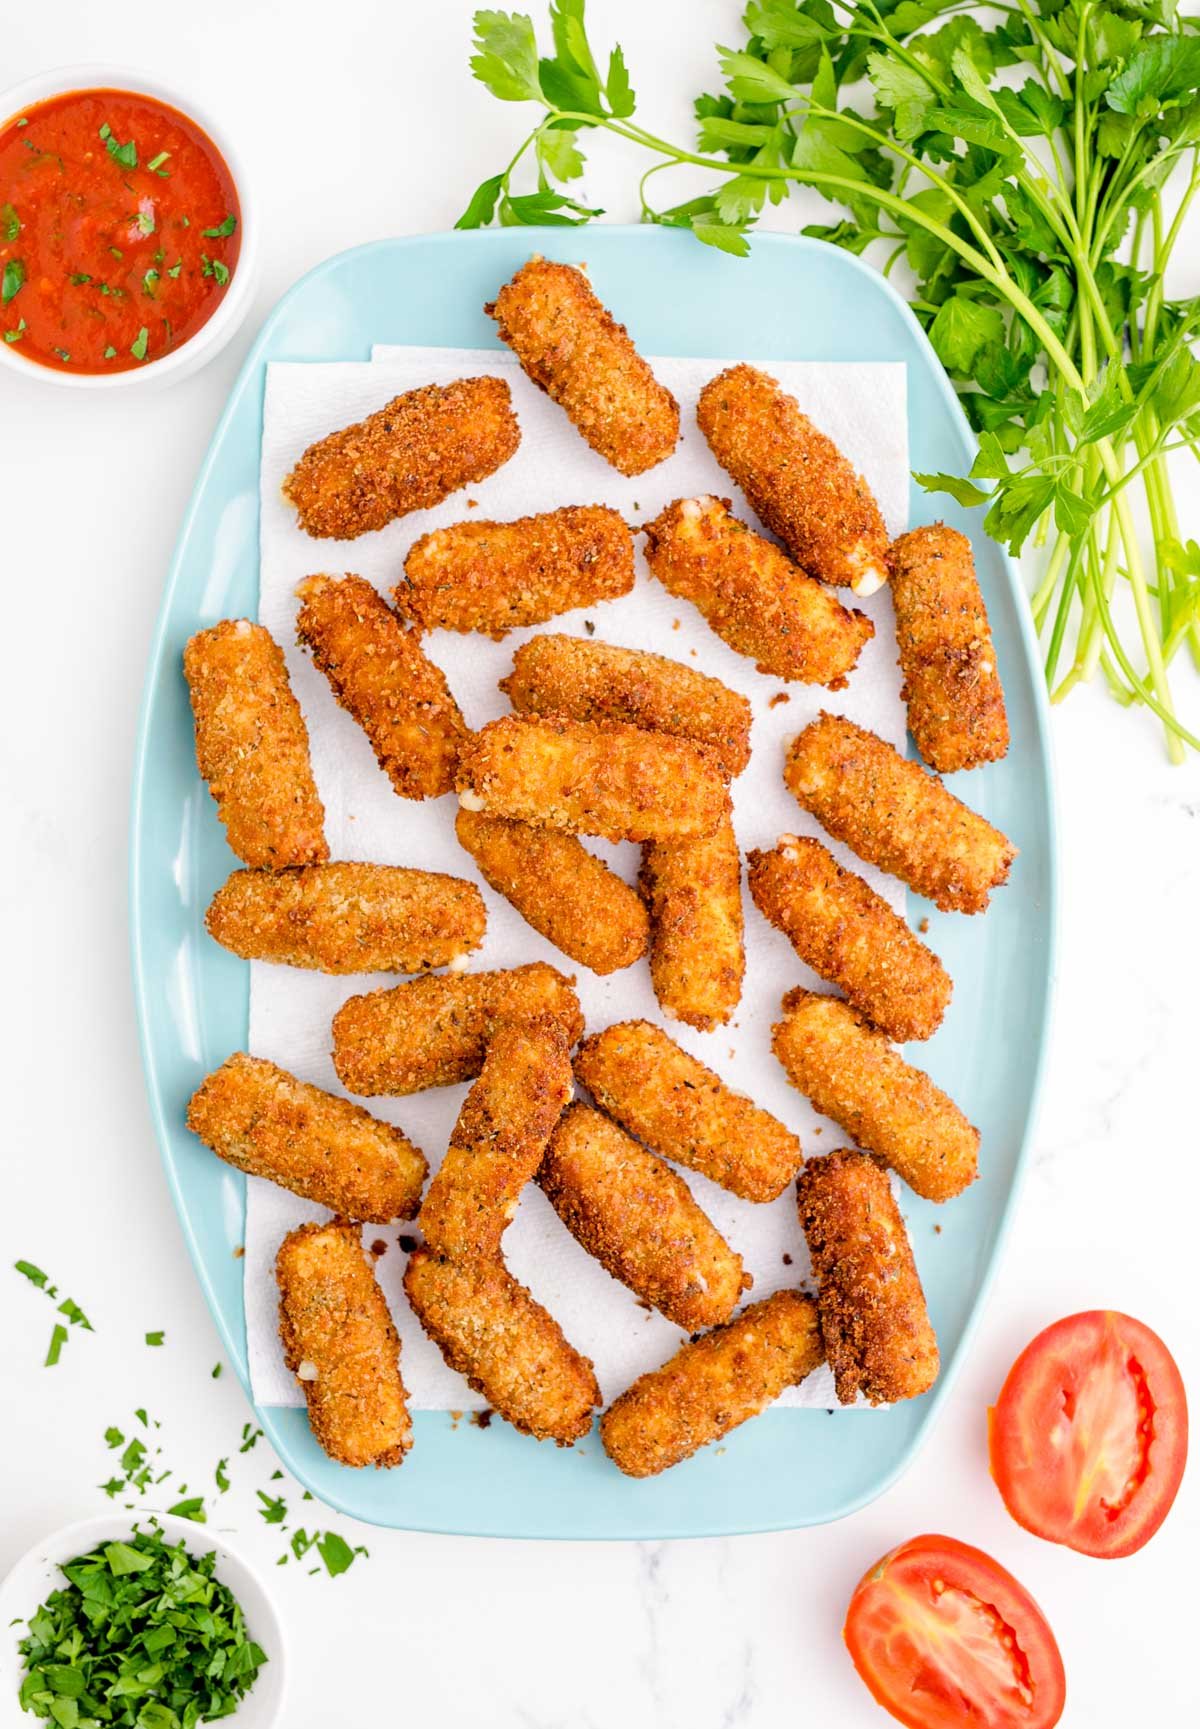 Overhead photo of mozzarella sticks on a paper towel-lined blue plate.